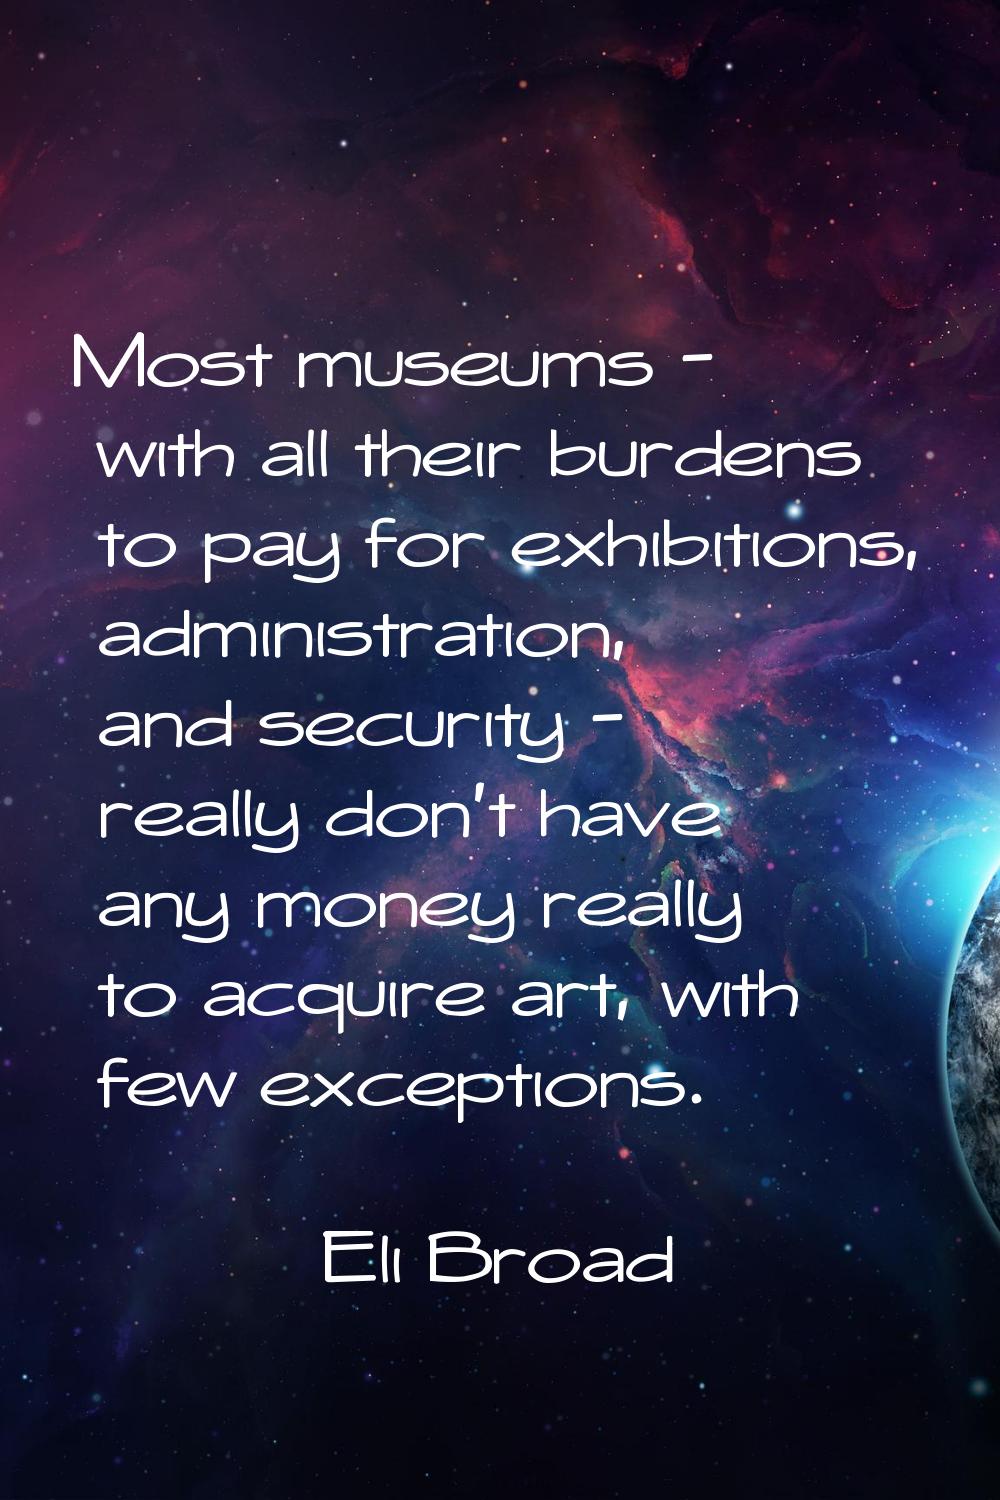 Most museums - with all their burdens to pay for exhibitions, administration, and security - really